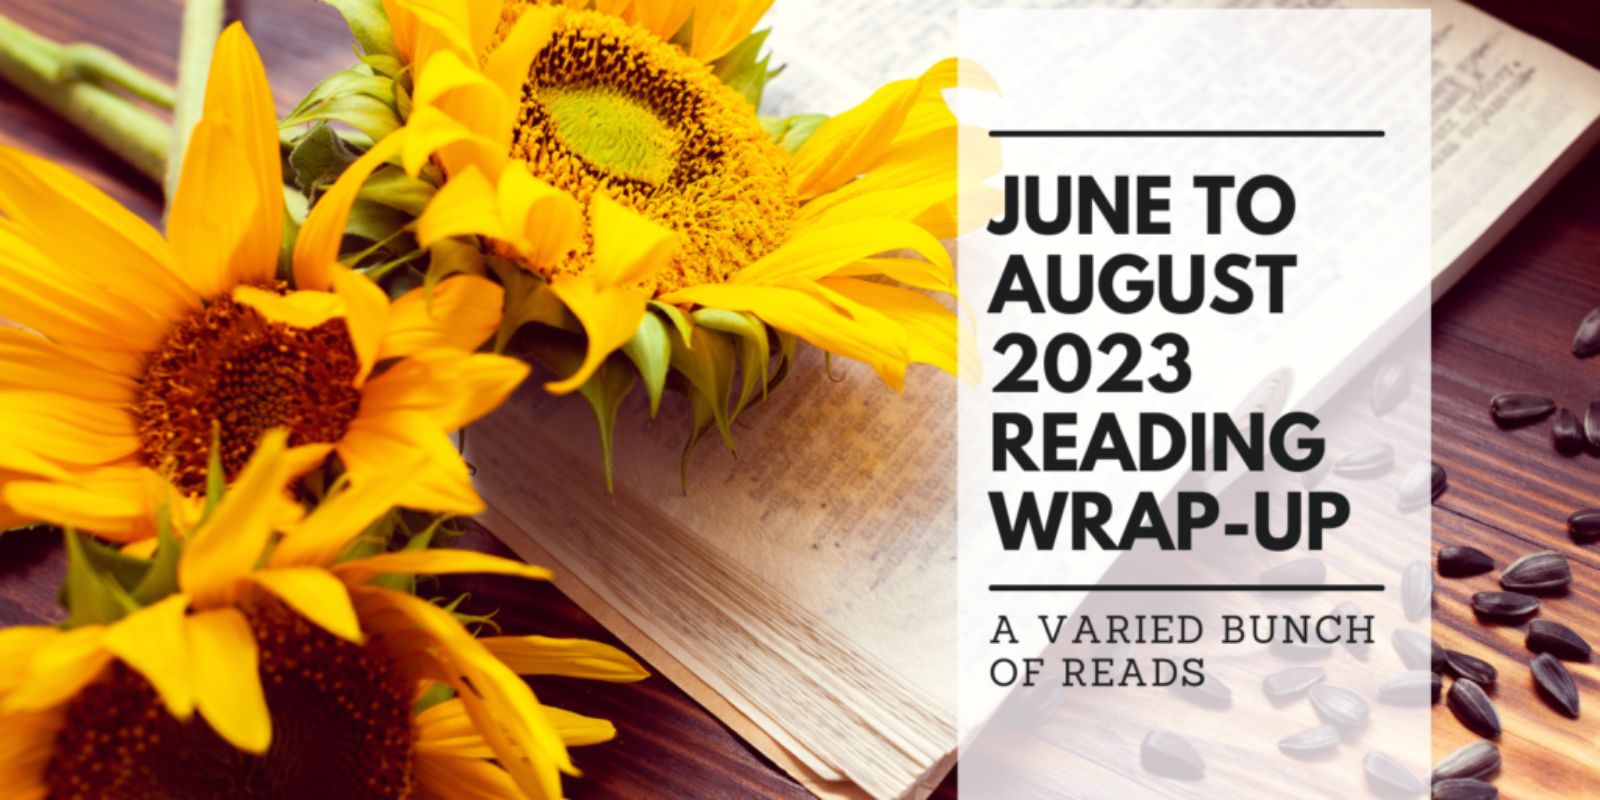 June to August 2023 Reading Wrap-Up Summer Reads and More